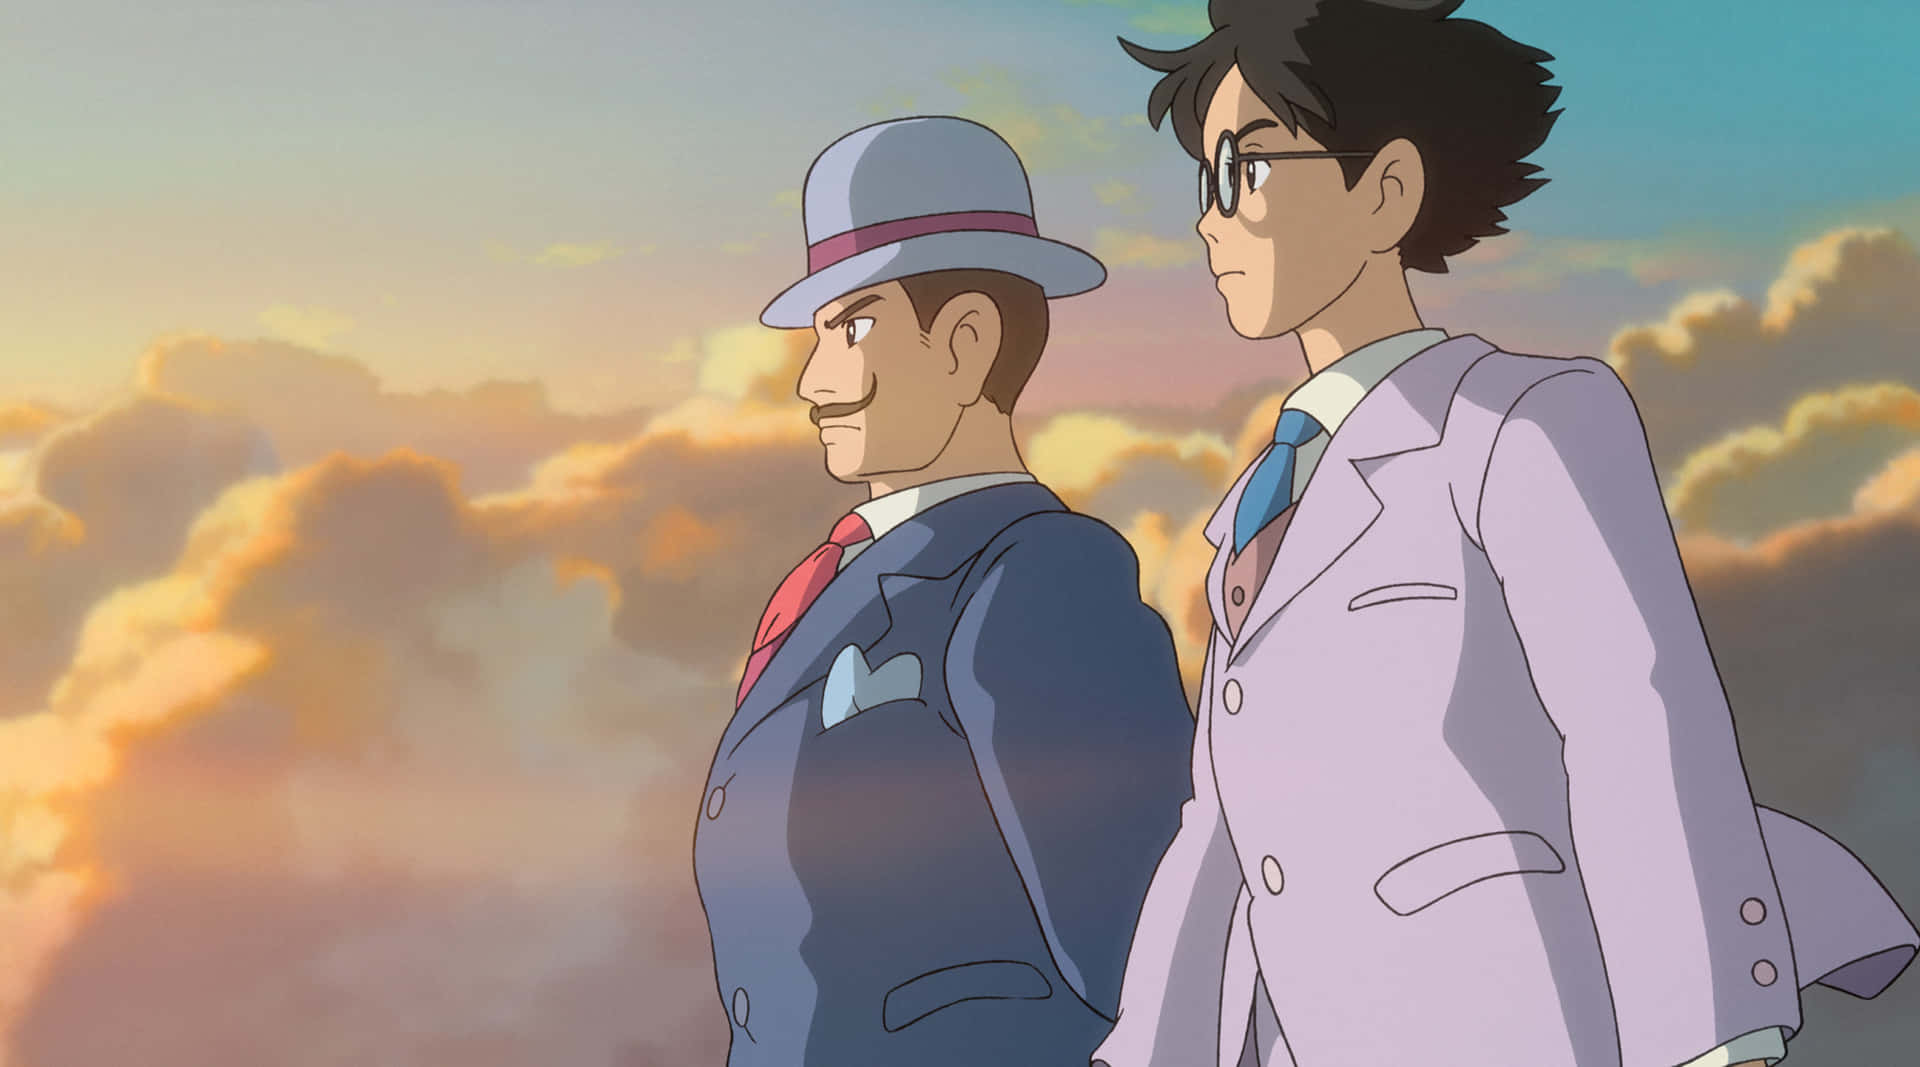 Stories take wing in ‘The Wind Rises’ Wallpaper